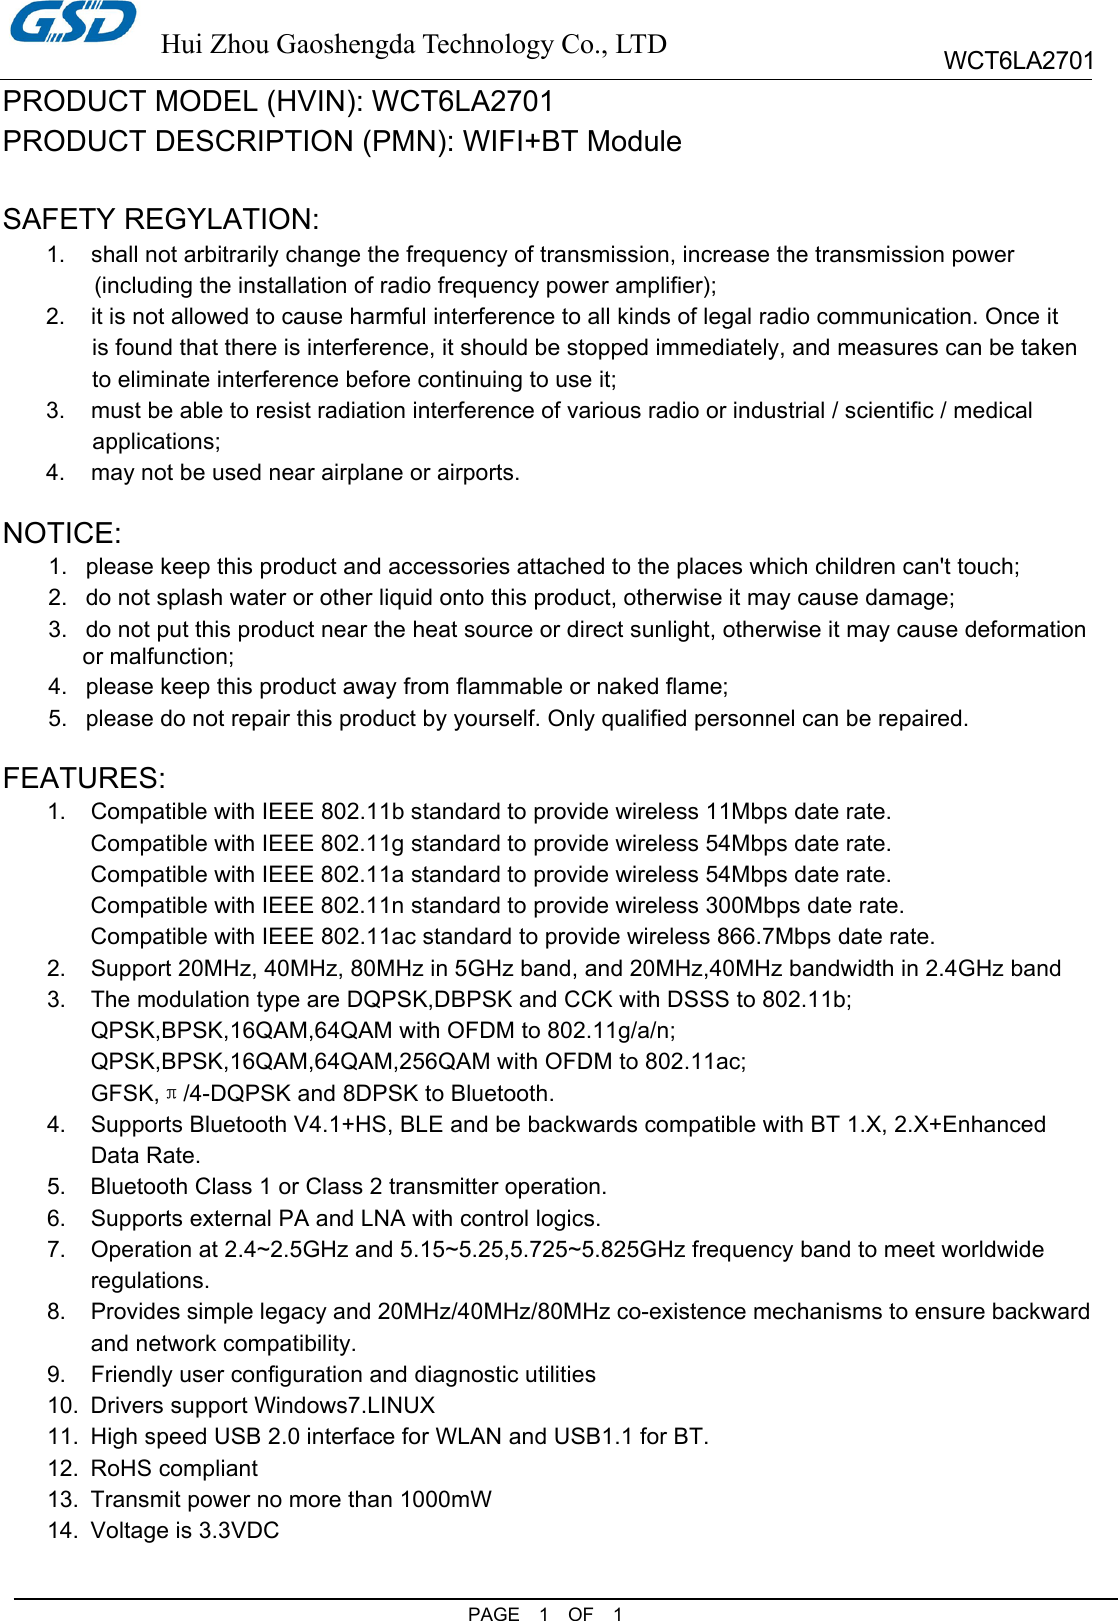  Hui Zhou Gaoshengda Technology Co., LTD PAGE  1  OF  1 WCT6LA2701 PRODUCT MODEL (HVIN): WCT6LA2701 PRODUCT DESCRIPTION (PMN): WIFI+BT Module  SAFETY REGYLATION: 1.  shall not arbitrarily change the frequency of transmission, increase the transmission power   (including the installation of radio frequency power amplifier); 2.  it is not allowed to cause harmful interference to all kinds of legal radio communication. Once it is found that there is interference, it should be stopped immediately, and measures can be taken to eliminate interference before continuing to use it; 3.  must be able to resist radiation interference of various radio or industrial / scientific / medical applications; 4.  may not be used near airplane or airports.  NOTICE: 1.  please keep this product and accessories attached to the places which children can&apos;t touch; 2.  do not splash water or other liquid onto this product, otherwise it may cause damage; 3.  do not put this product near the heat source or direct sunlight, otherwise it may cause deformation   or malfunction; 4.  please keep this product away from flammable or naked flame; 5.  please do not repair this product by yourself. Only qualified personnel can be repaired.  FEATURES: 1.  Compatible with IEEE 802.11b standard to provide wireless 11Mbps date rate. Compatible with IEEE 802.11g standard to provide wireless 54Mbps date rate. Compatible with IEEE 802.11a standard to provide wireless 54Mbps date rate. Compatible with IEEE 802.11n standard to provide wireless 300Mbps date rate. Compatible with IEEE 802.11ac standard to provide wireless 866.7Mbps date rate. 2.  Support 20MHz, 40MHz, 80MHz in 5GHz band, and 20MHz,40MHz bandwidth in 2.4GHz band 3.  The modulation type are DQPSK,DBPSK and CCK with DSSS to 802.11b; QPSK,BPSK,16QAM,64QAM with OFDM to 802.11g/a/n; QPSK,BPSK,16QAM,64QAM,256QAM with OFDM to 802.11ac; GFSK,π/4-DQPSK and 8DPSK to Bluetooth. 4.  Supports Bluetooth V4.1+HS, BLE and be backwards compatible with BT 1.X, 2.X+Enhanced Data Rate. 5.  Bluetooth Class 1 or Class 2 transmitter operation. 6.  Supports external PA and LNA with control logics. 7.  Operation at 2.4~2.5GHz and 5.15~5.25,5.725~5.825GHz frequency band to meet worldwide regulations. 8.  Provides simple legacy and 20MHz/40MHz/80MHz co-existence mechanisms to ensure backward and network compatibility. 9.  Friendly user configuration and diagnostic utilities 10.  Drivers support Windows7.LINUX 11.  High speed USB 2.0 interface for WLAN and USB1.1 for BT. 12.  RoHS compliant 13.  Transmit power no more than 1000mW 14.  Voltage is 3.3VDC 